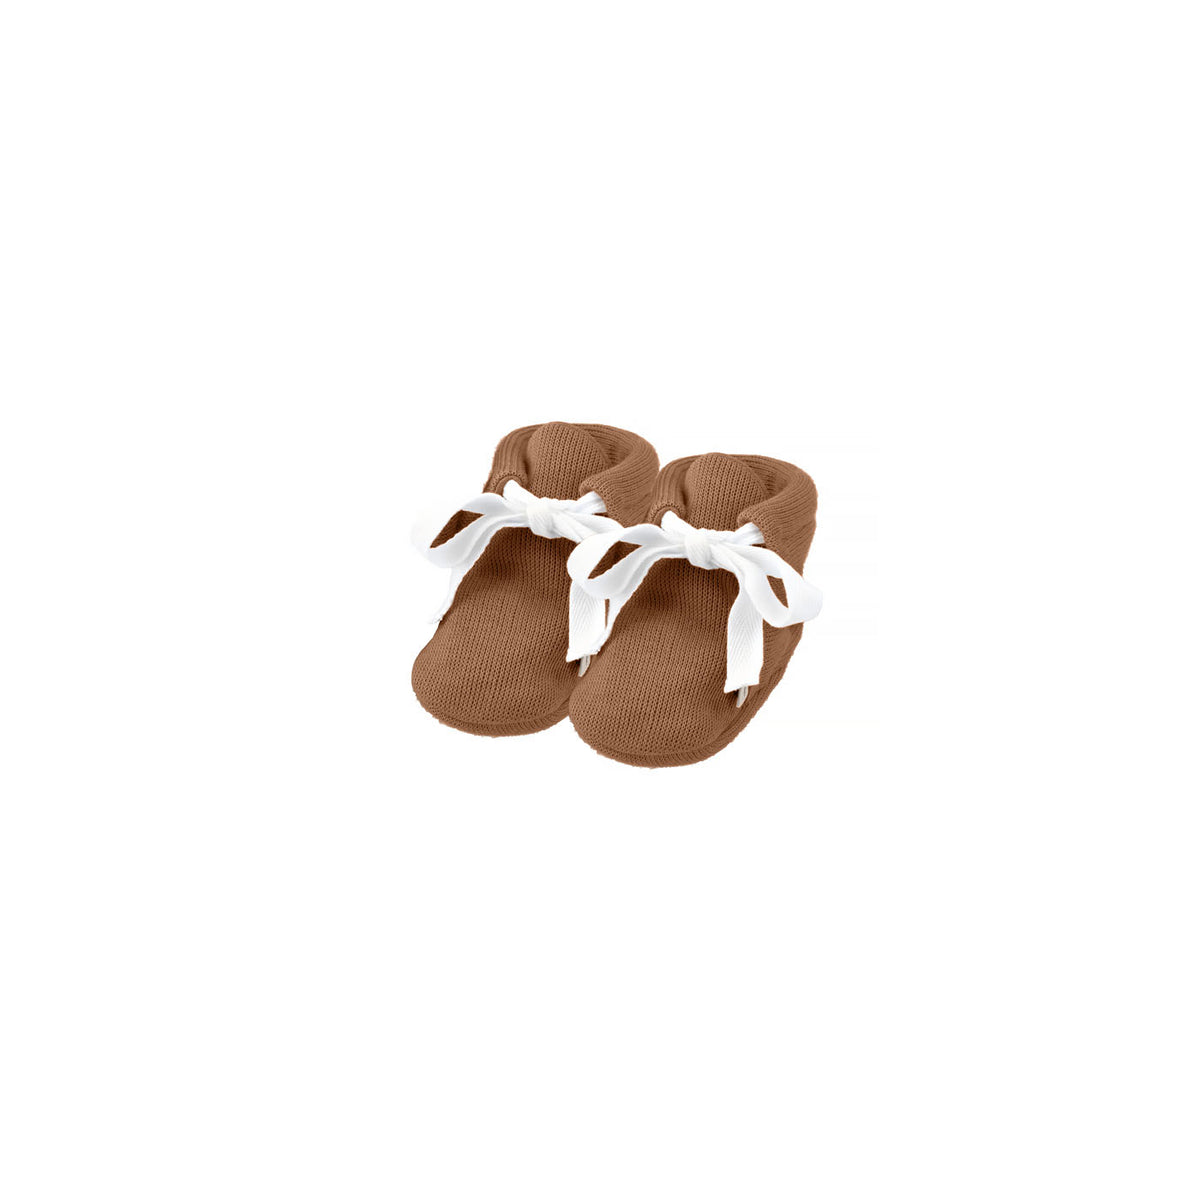 uaua baby booties with white tie in chocolate